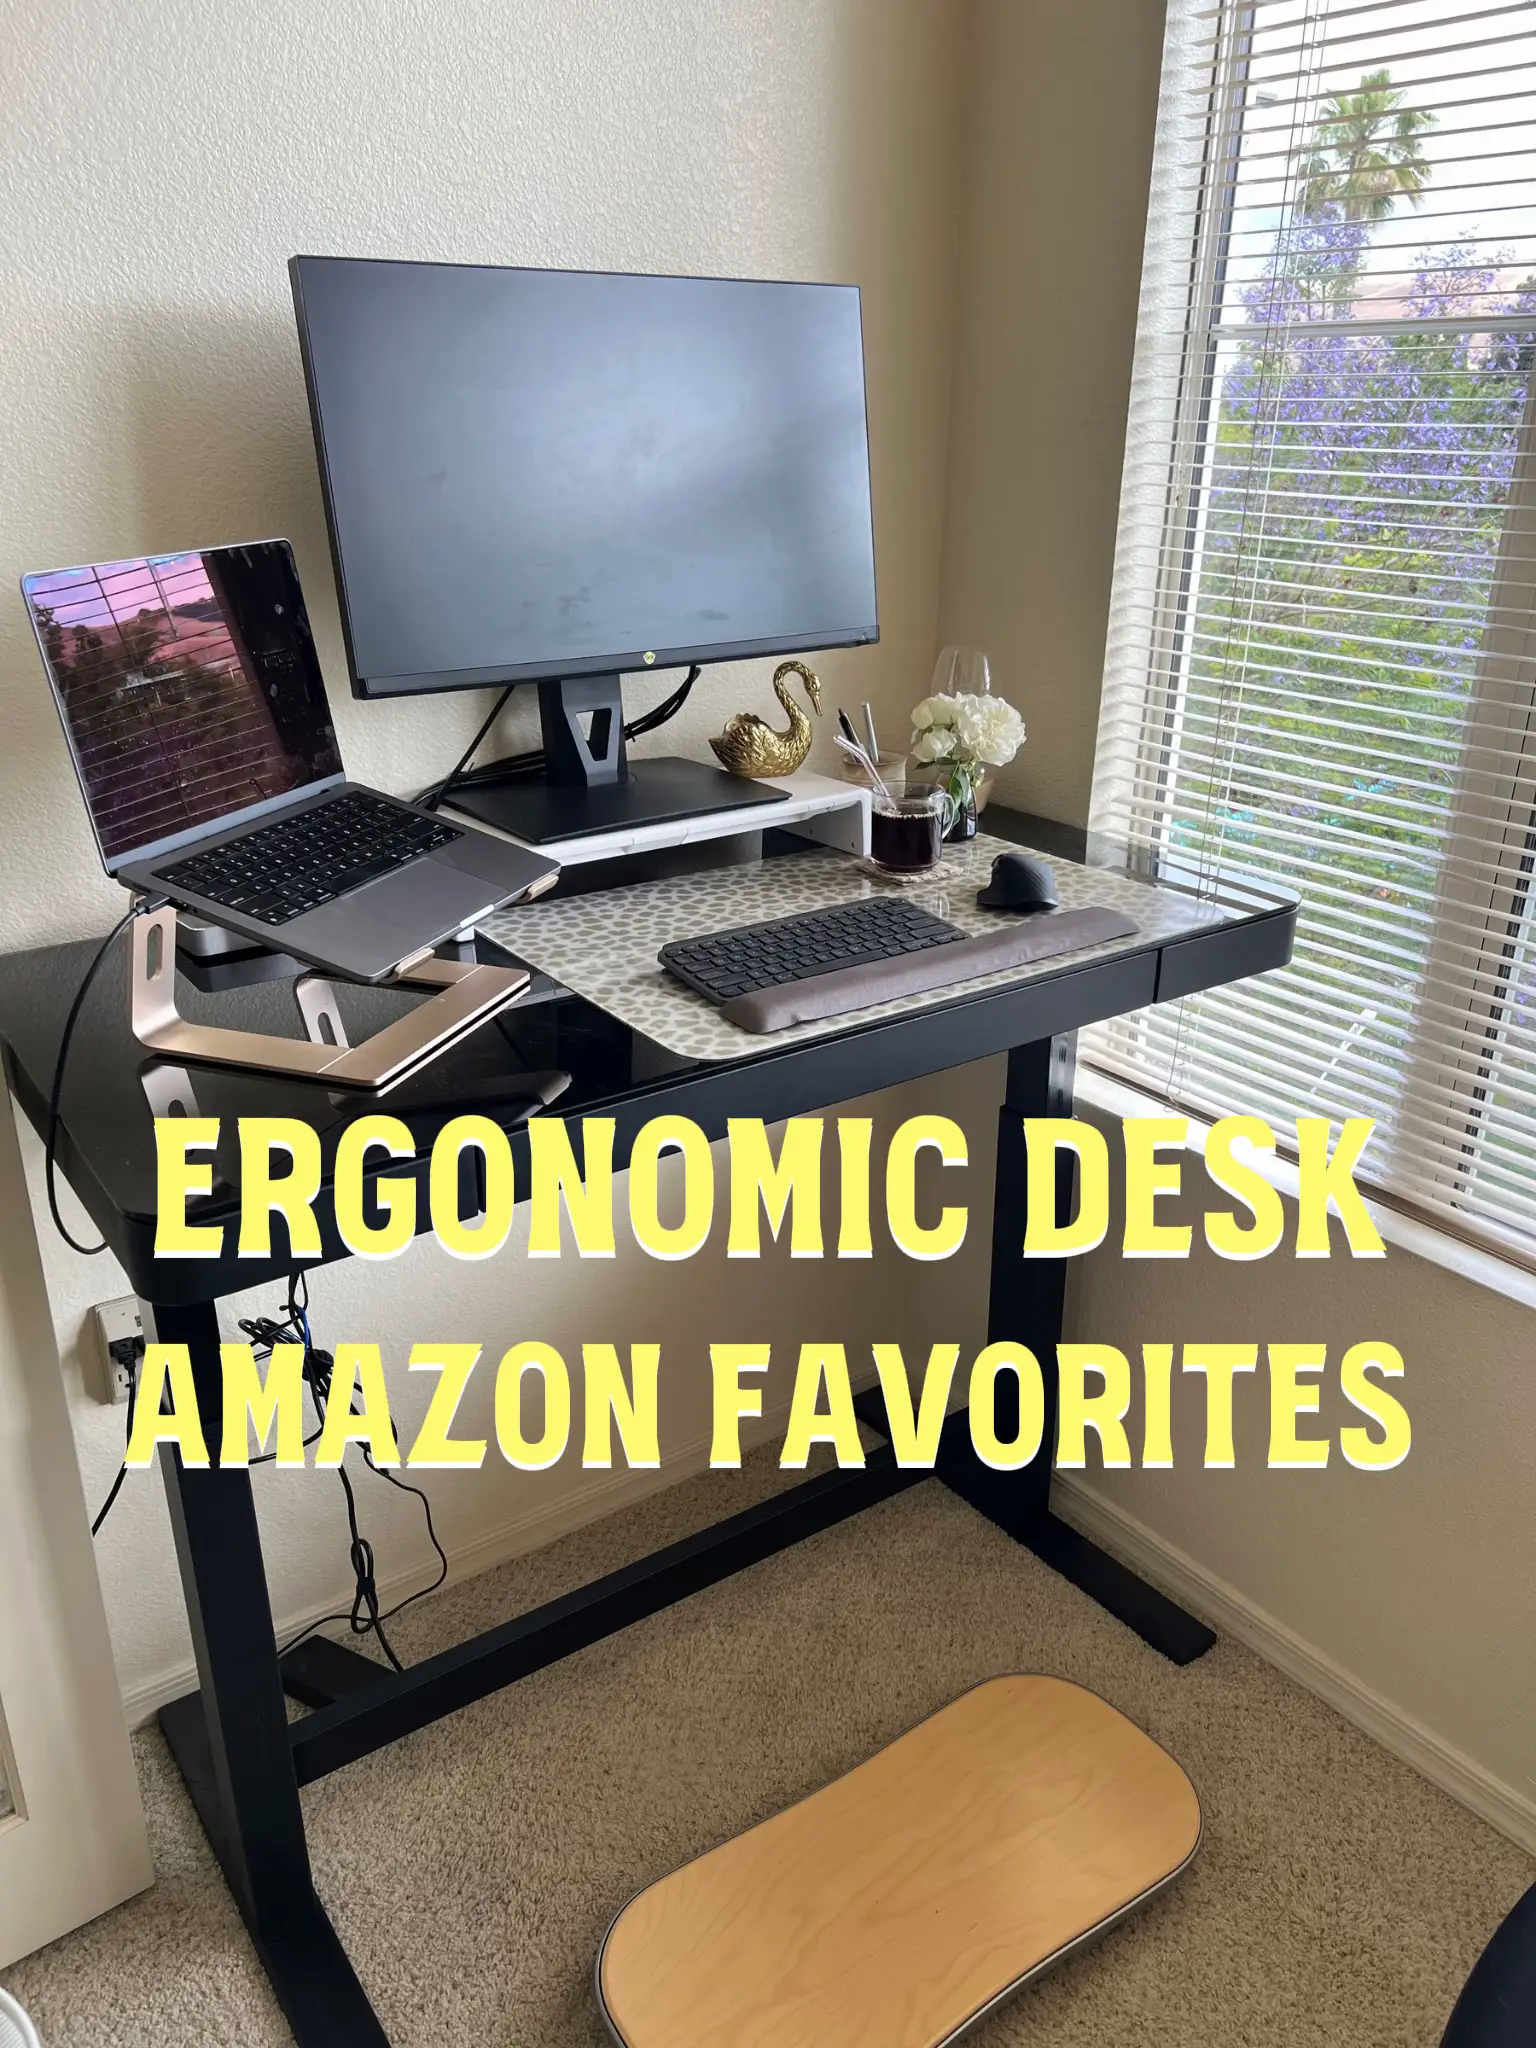 Budget friendly Ergonomic accessories, Gallery posted by Delara 💖👩🏻‍💻